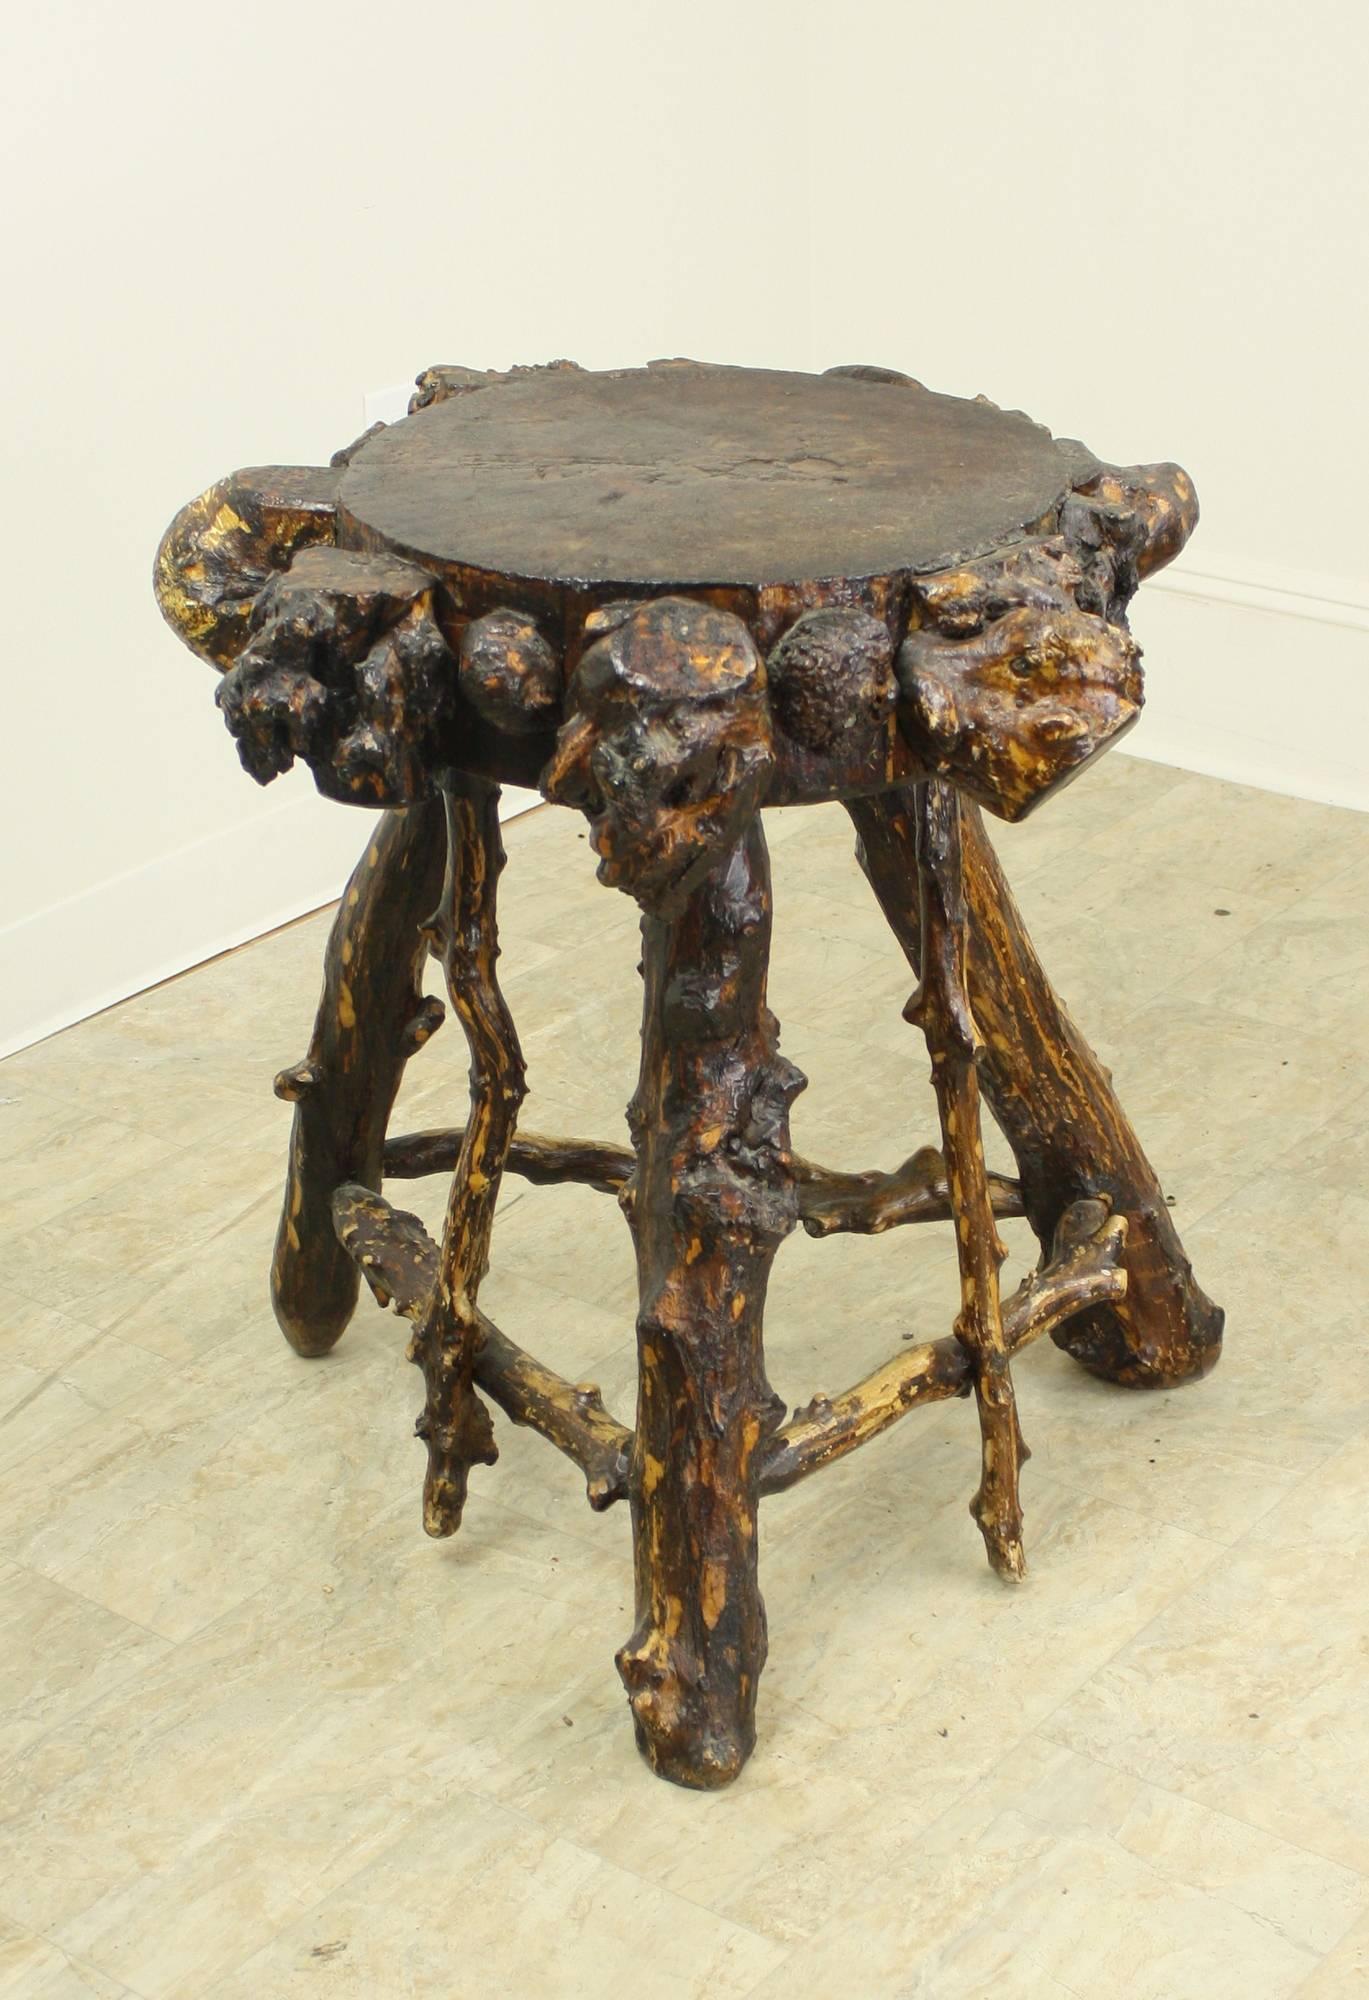 A terrific eye-catching table from Sweden and quite a conversation piece as well. This is a good height to put a drink on, and a nice size to sit next to an armchair. The burrs used to decorate the thick top are great. Heavy, solid and sturdy. Most